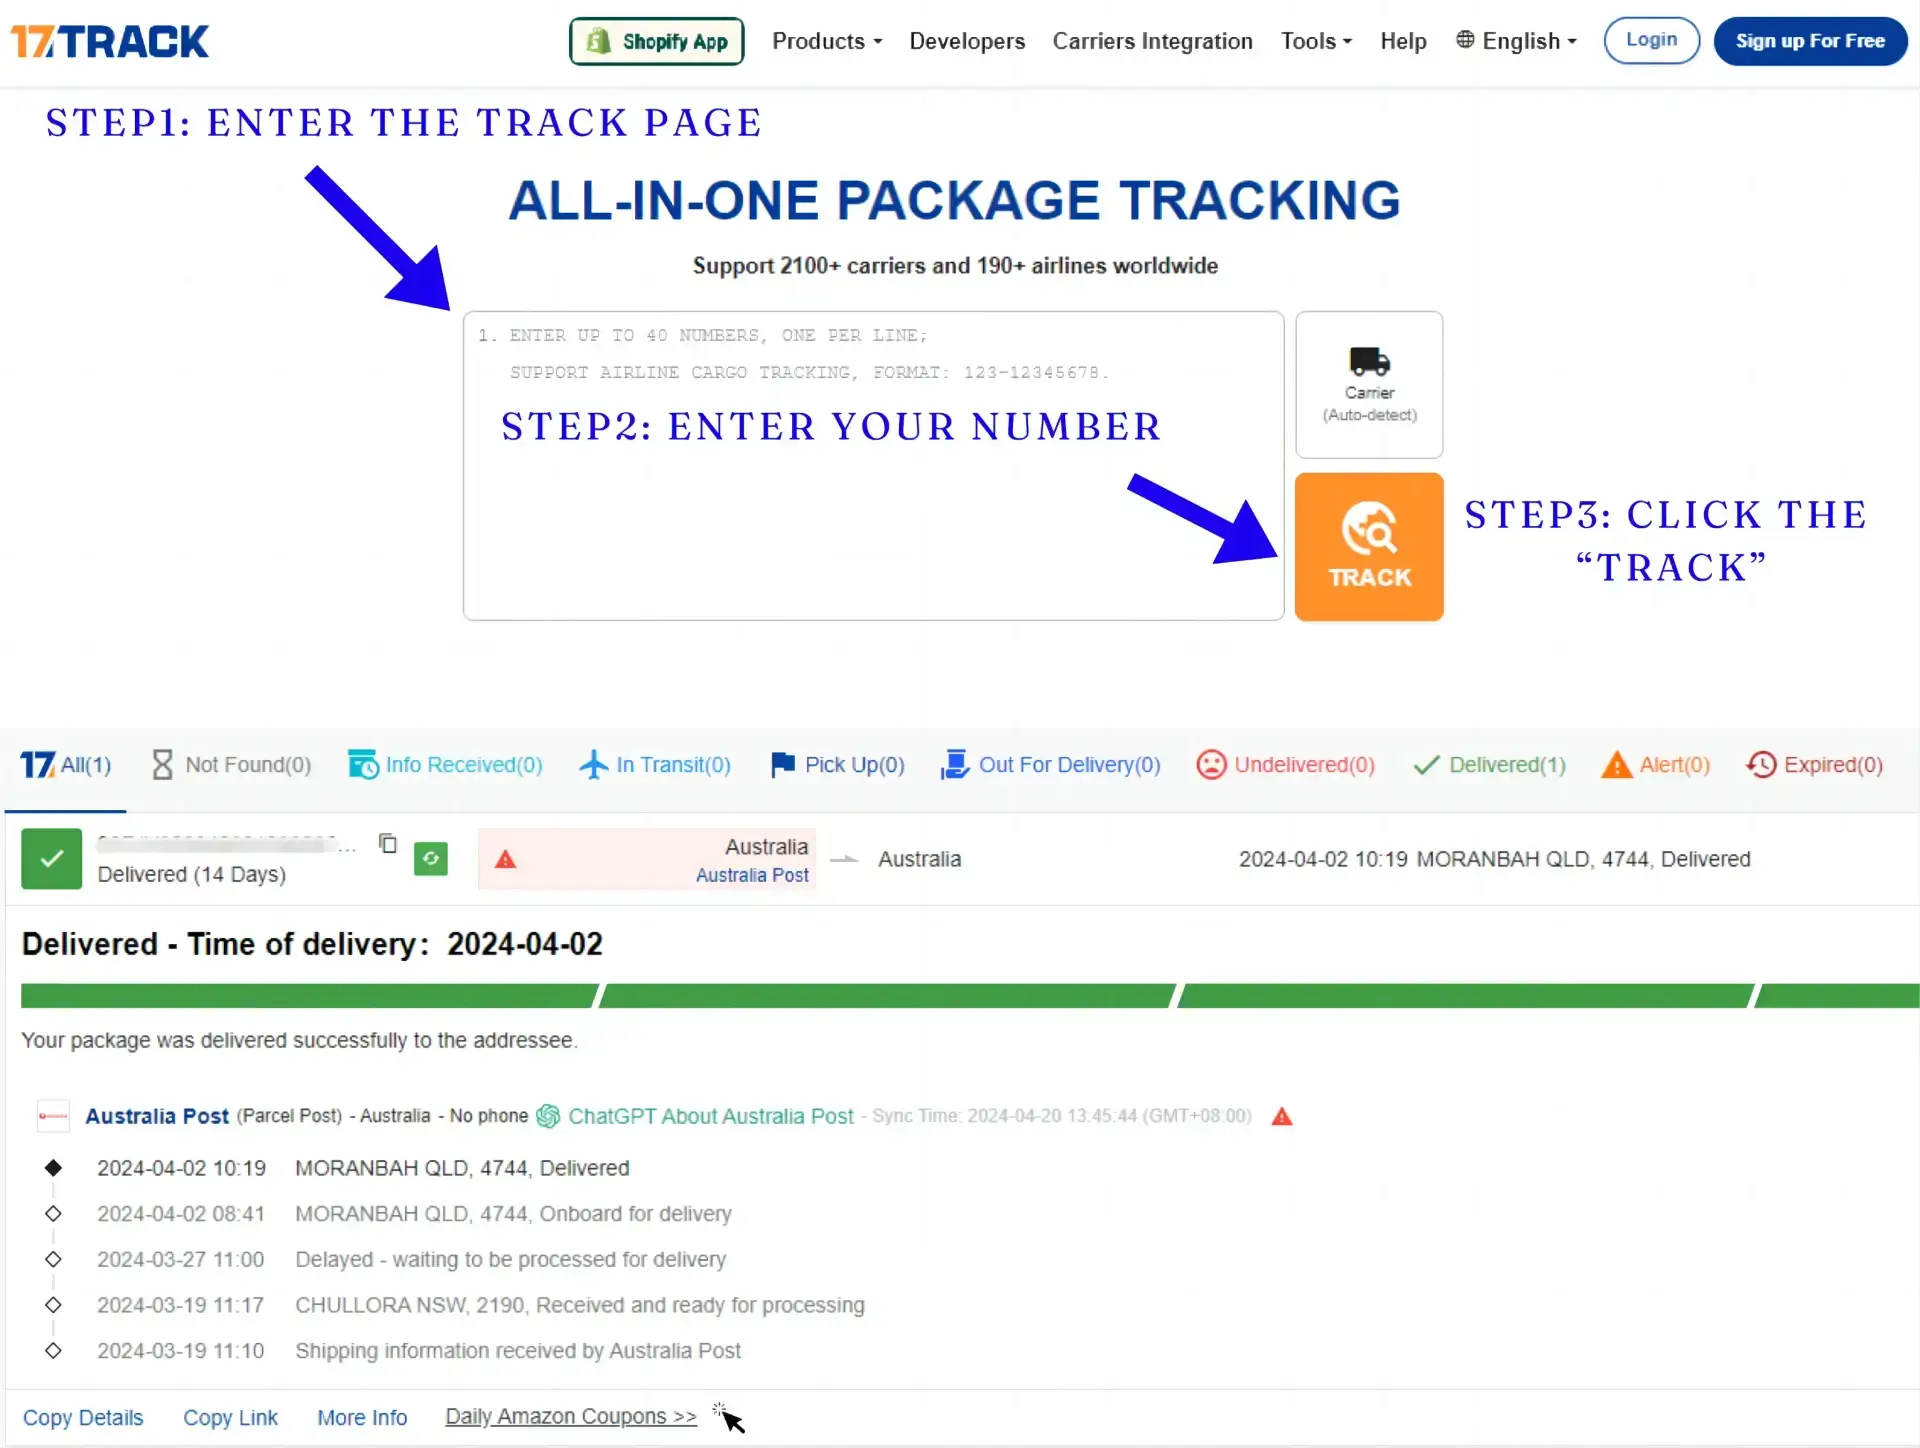 UPS Mail Innovations Tracking. Learn how to find your tracking number on 17TRACK. Enter your tracking number on the 17TRACK official website.